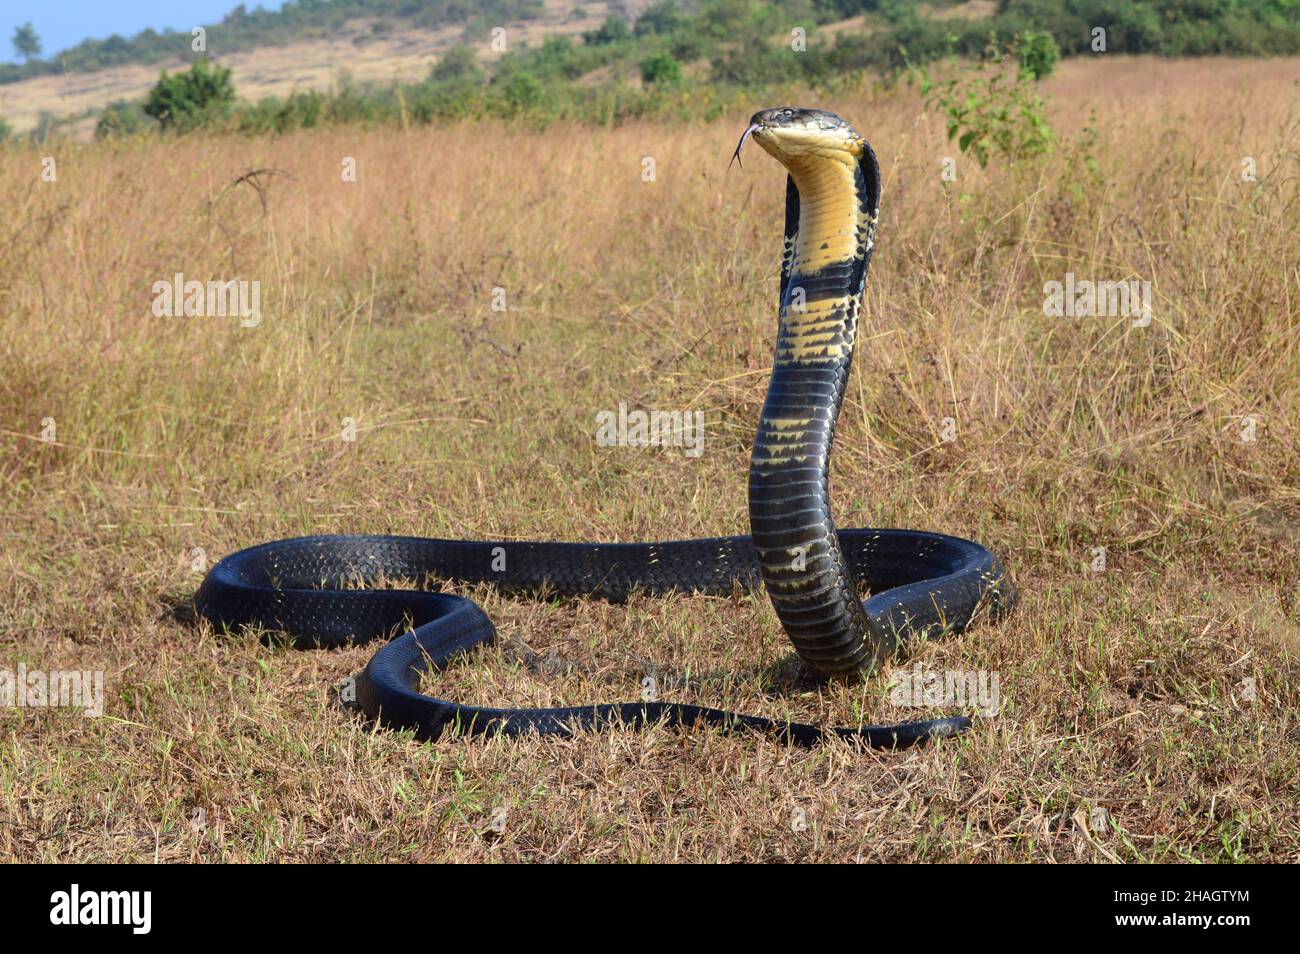 King cobra, Ophiophagus hannah is a venomous snake species of elapids endemic to jungles in Southern and Southeast Asia, goa India Stock Photo